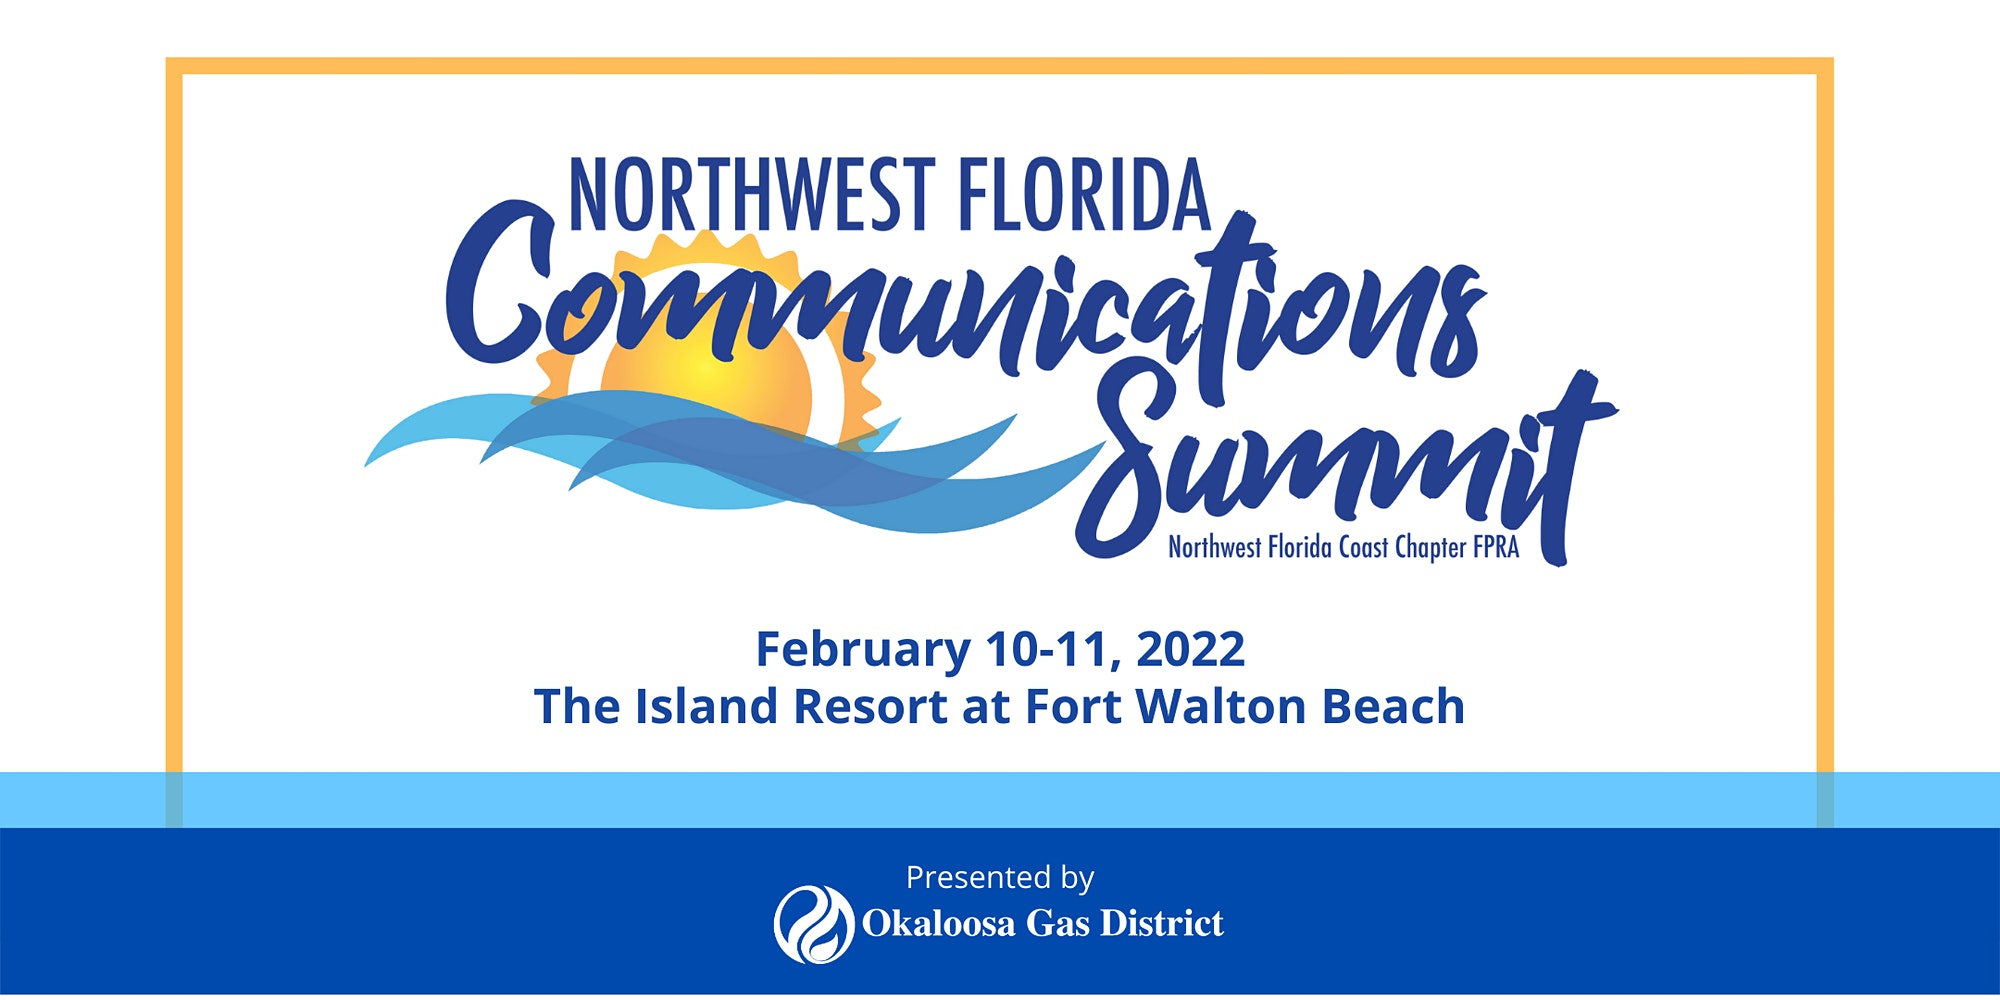 nwfl-communications-summit-presented-by-okaloosa-gas-district-get-the